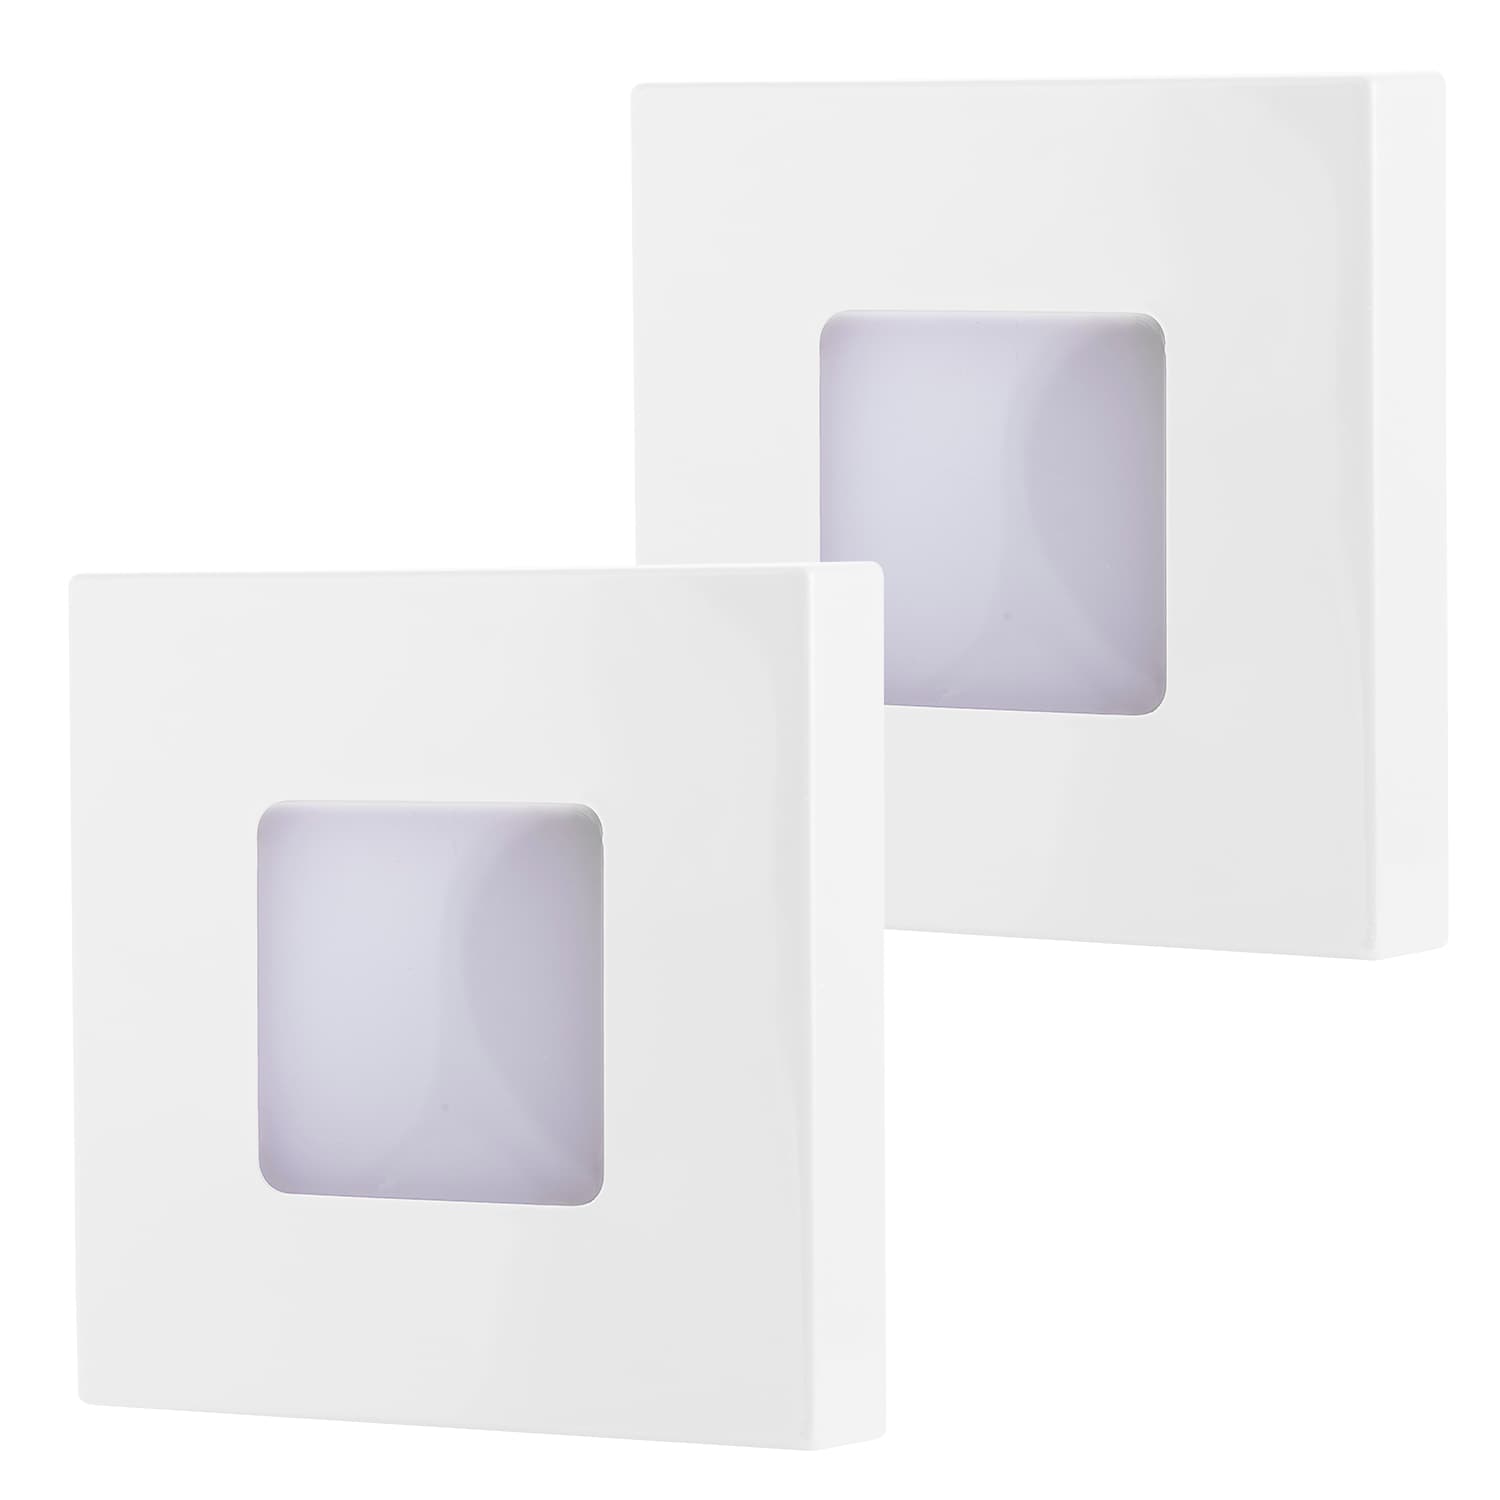 2-pack Automatic LED Night Light 